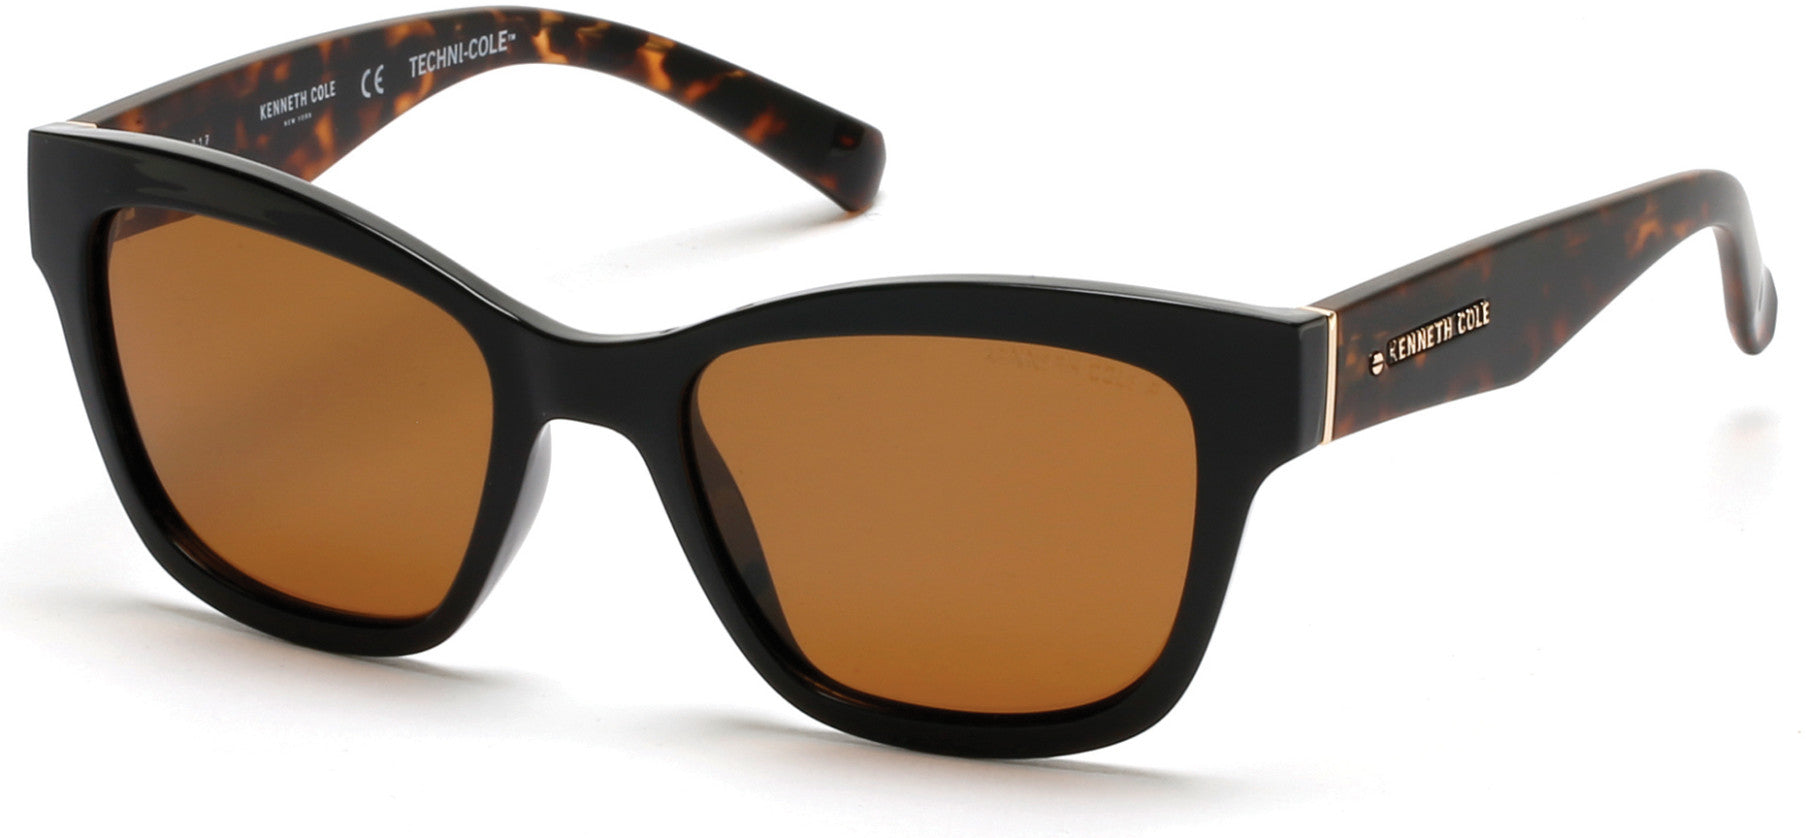 Kenneth Cole New York,Kenneth Cole Reaction KC7217 Sunglasses 01H-01H - Shiny Black / Brown Polarized Lenses